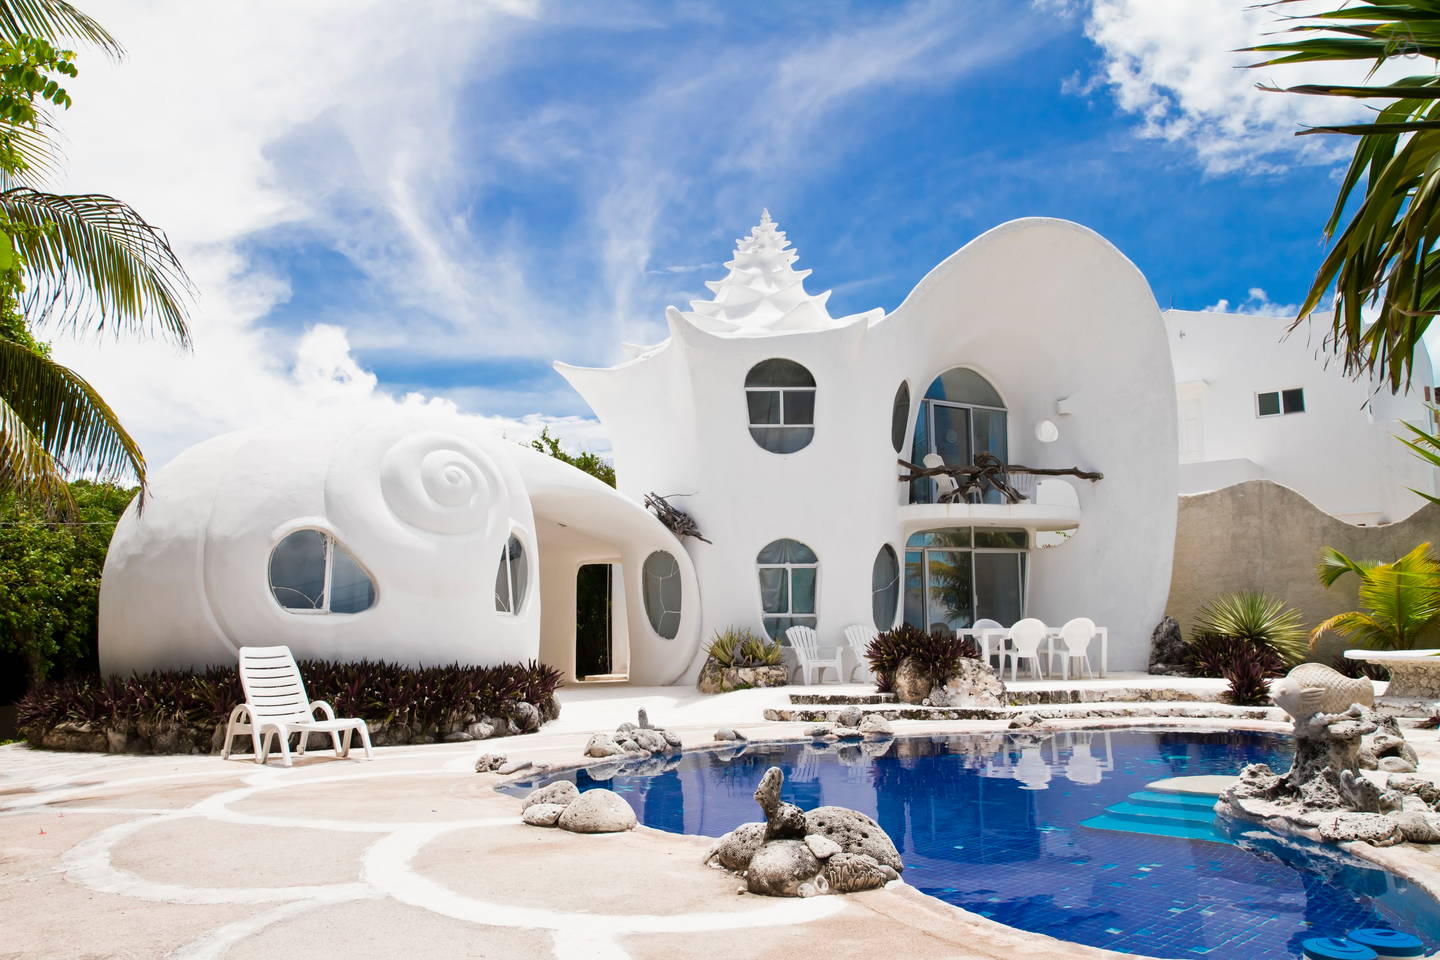 Quirky Airbnbs Seashell House